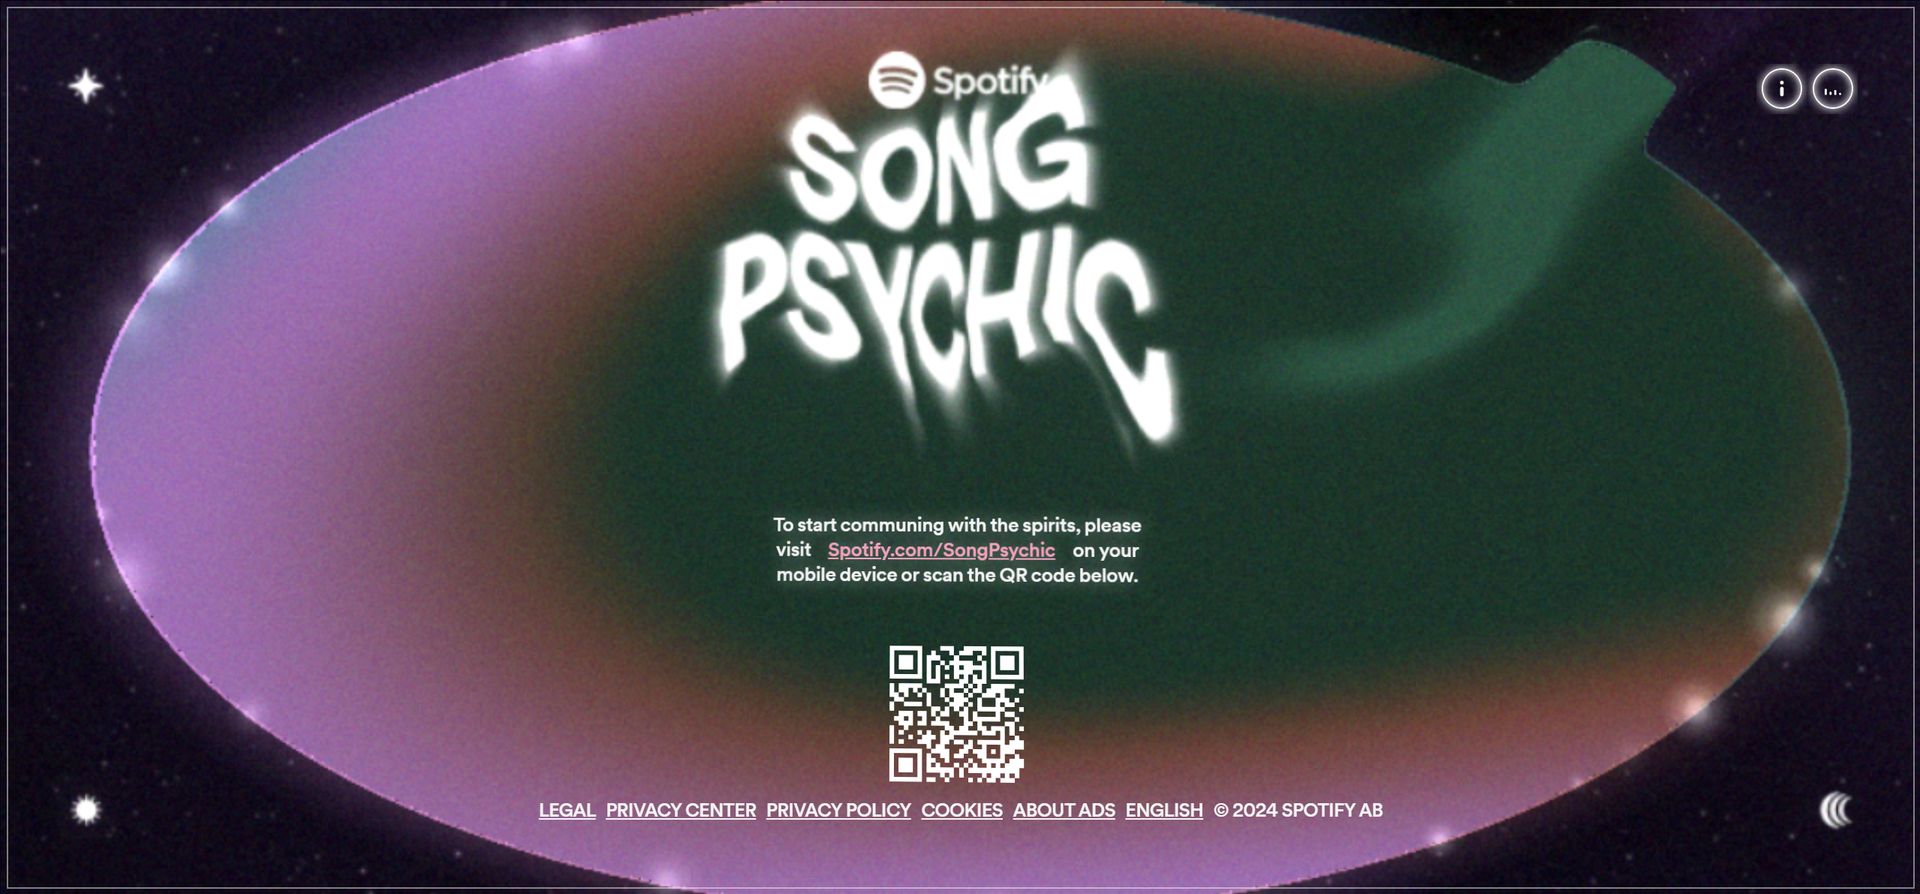 How to use Spotify Song Psychic feature: Ask questions, get song answers! An entertaining twist to music interaction. Available for all.